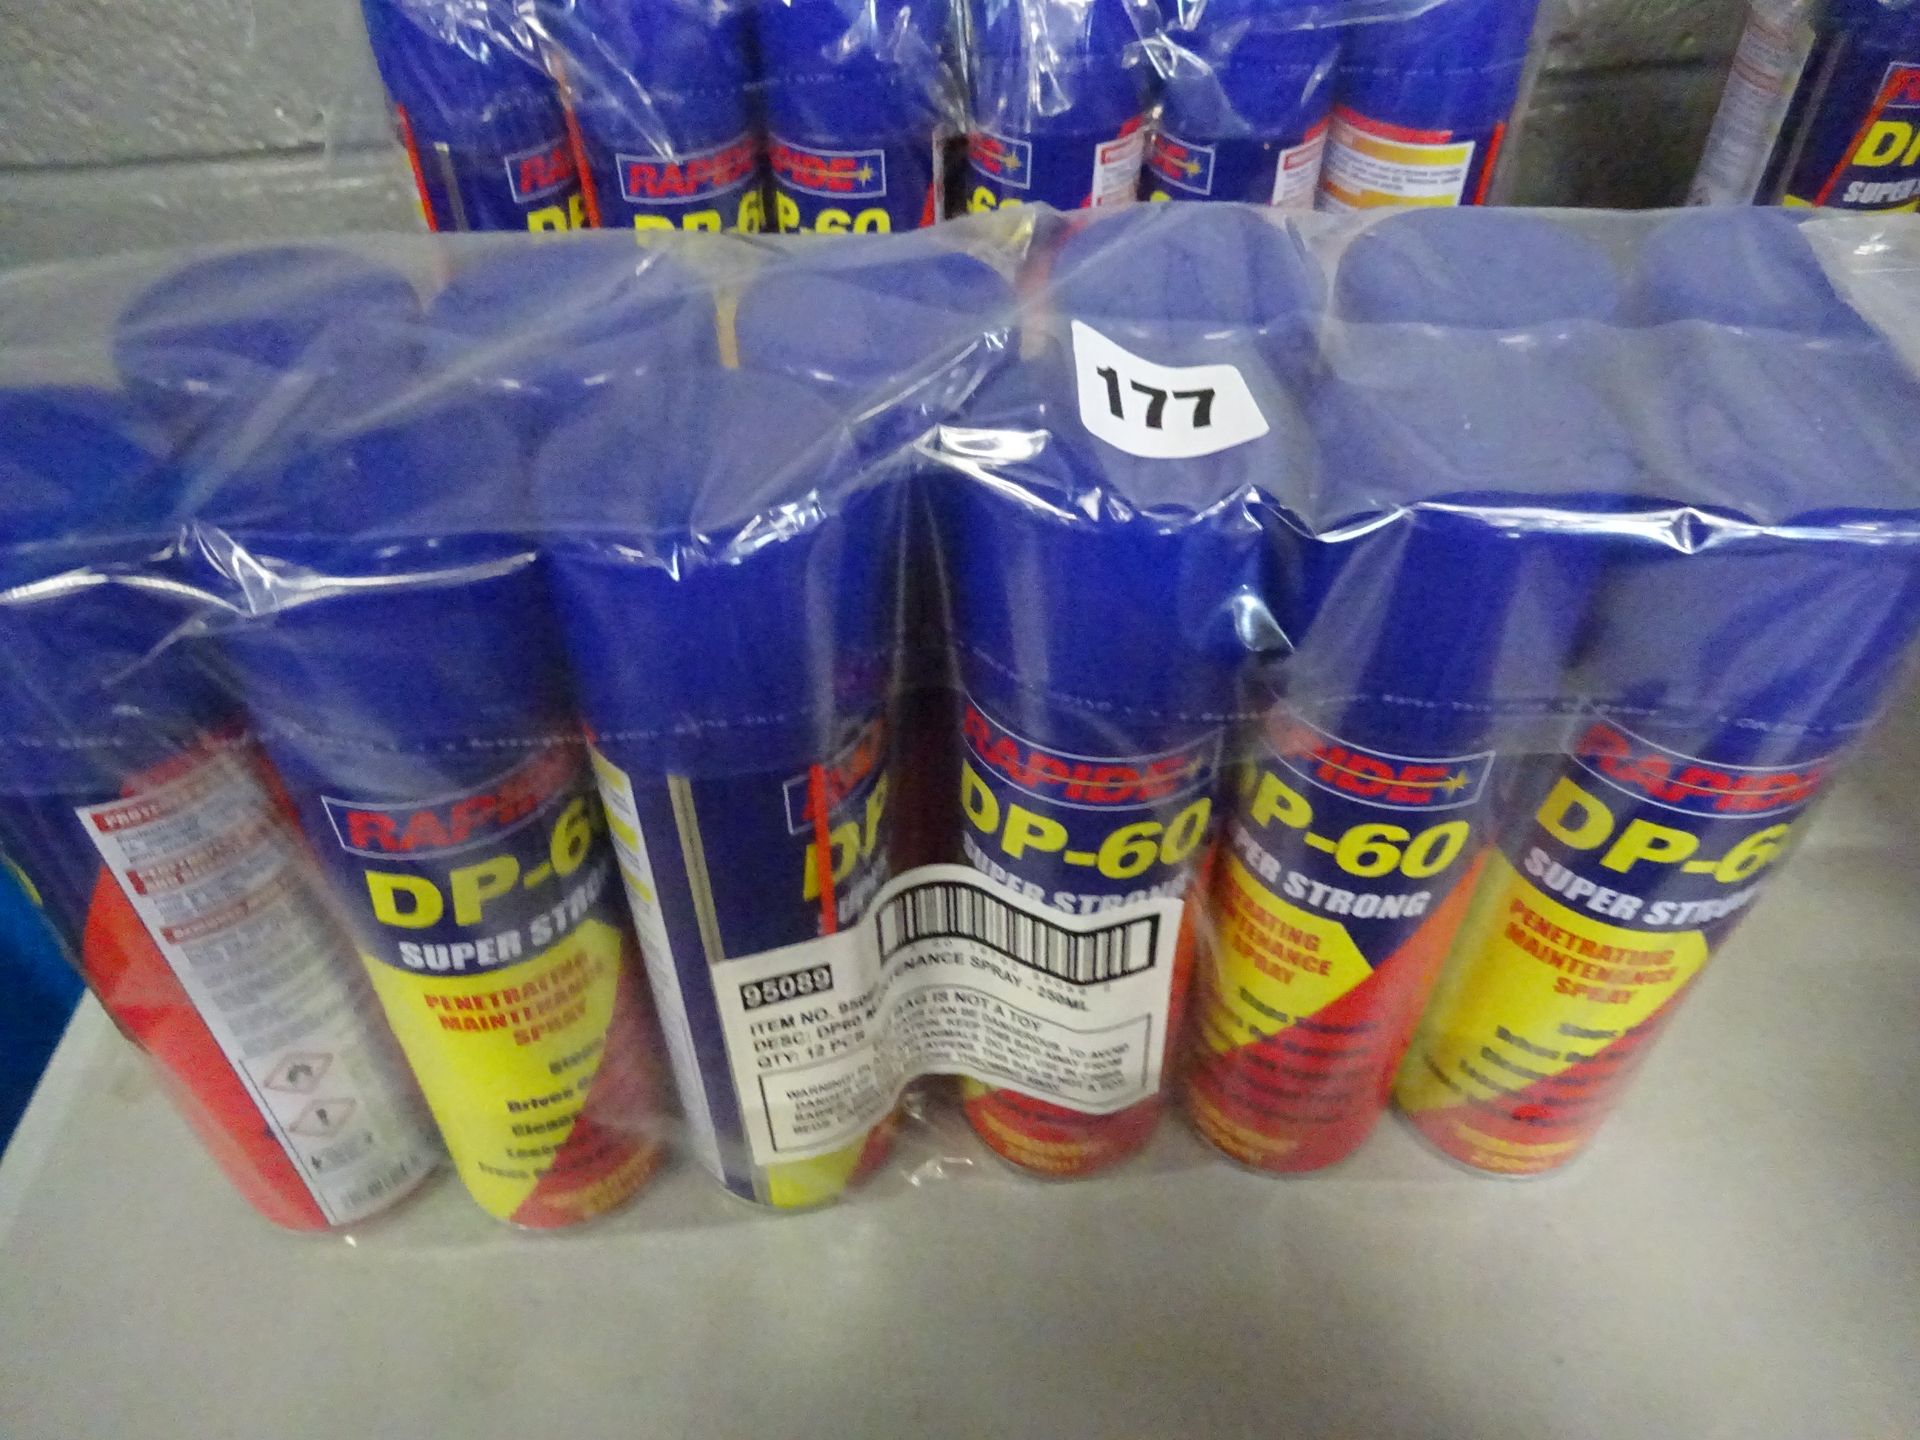 12 CANS OF DP 60